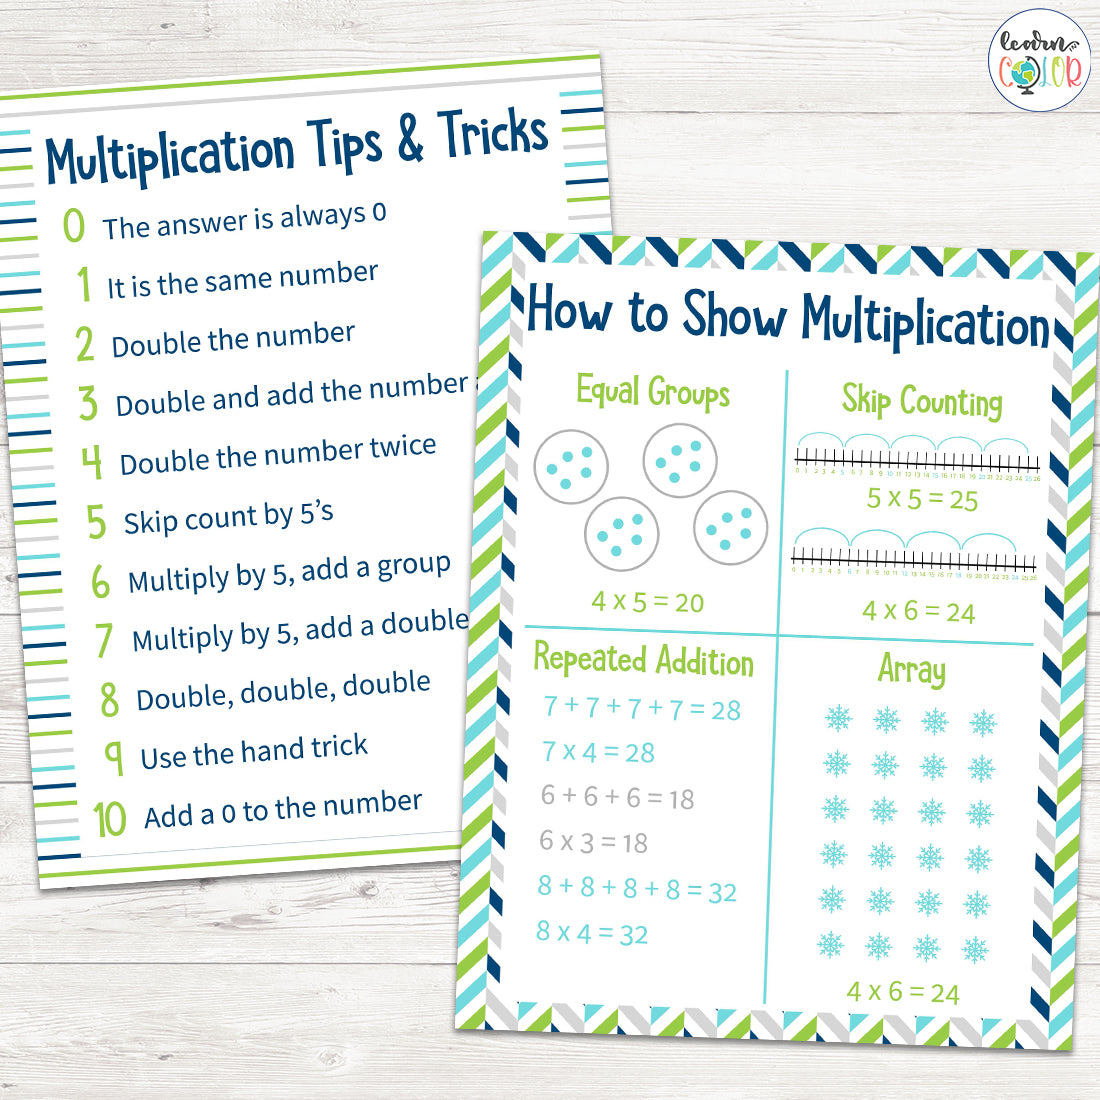 multiplication-cheat-sheets-learn-in-color